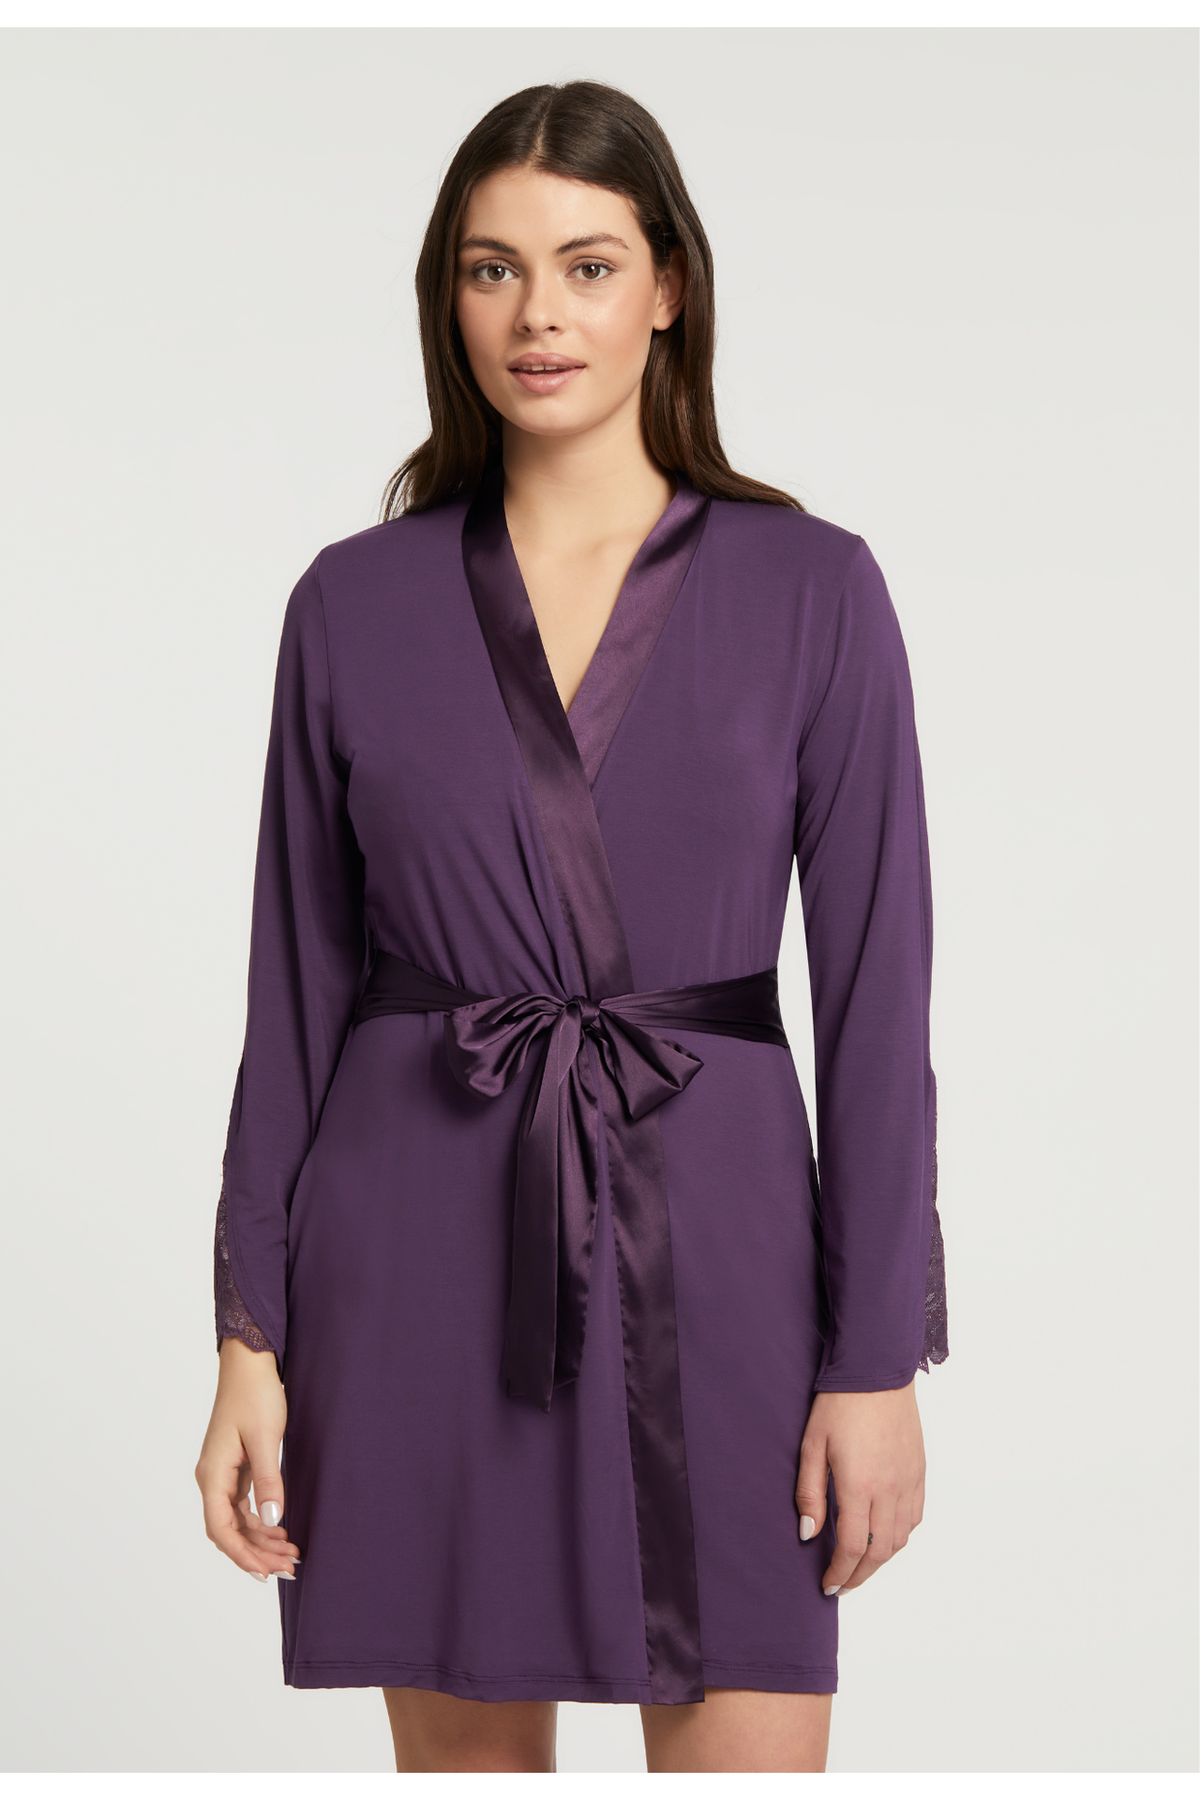 Fleur't Winter Bliss Robe - Style 6318, front, pinot